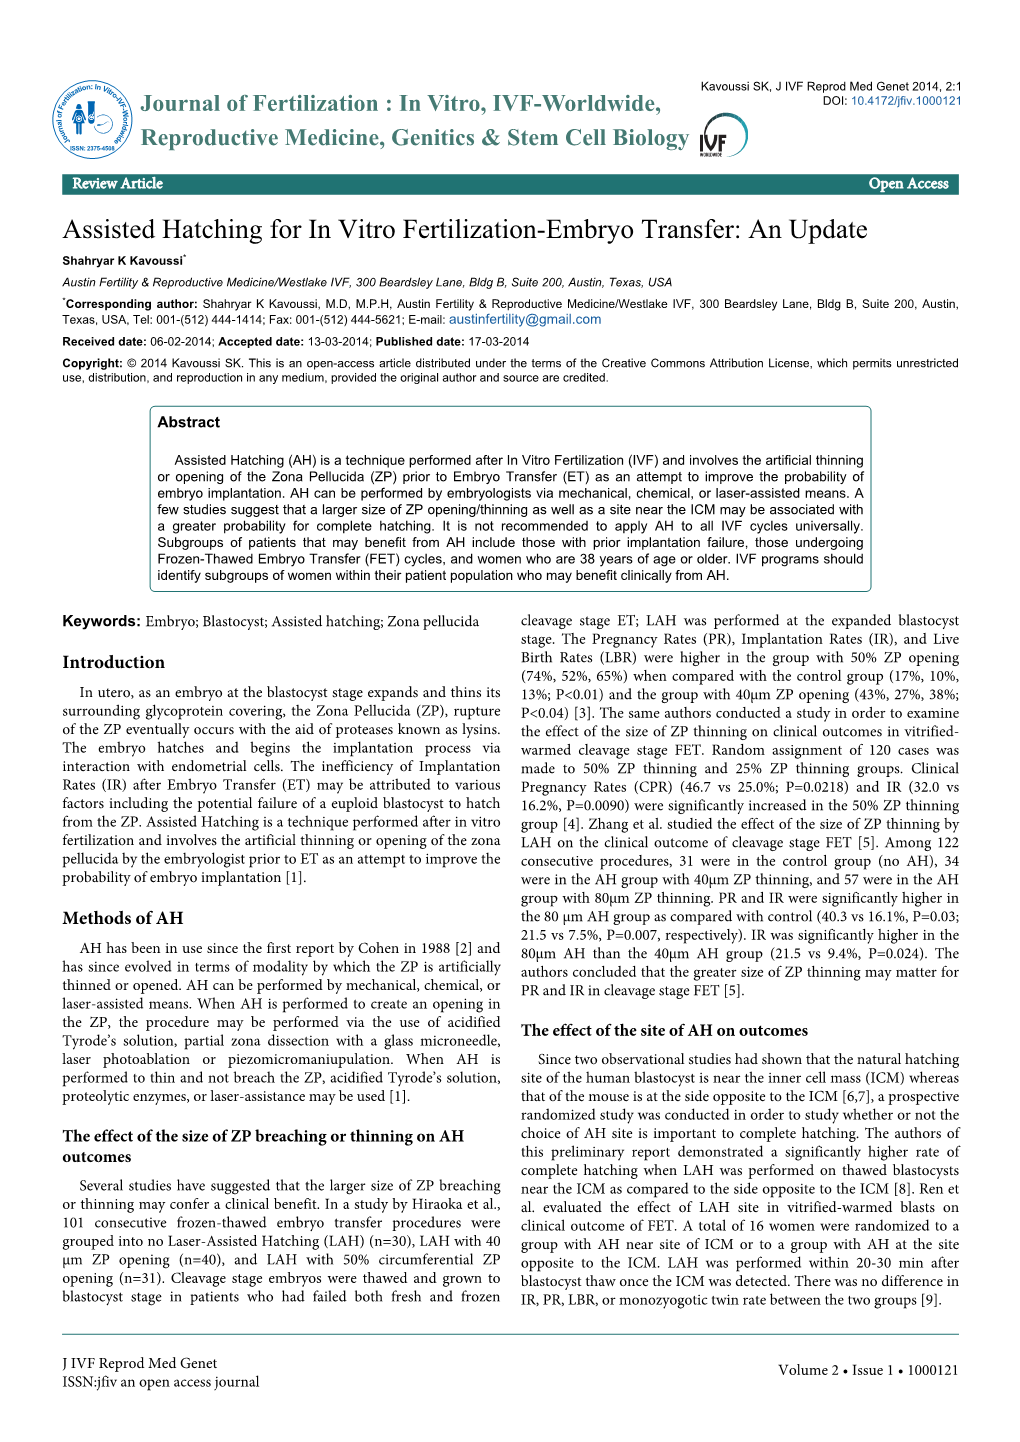 Assisted Hatching for in Vitro Fertilization-Embryo Transfer: An